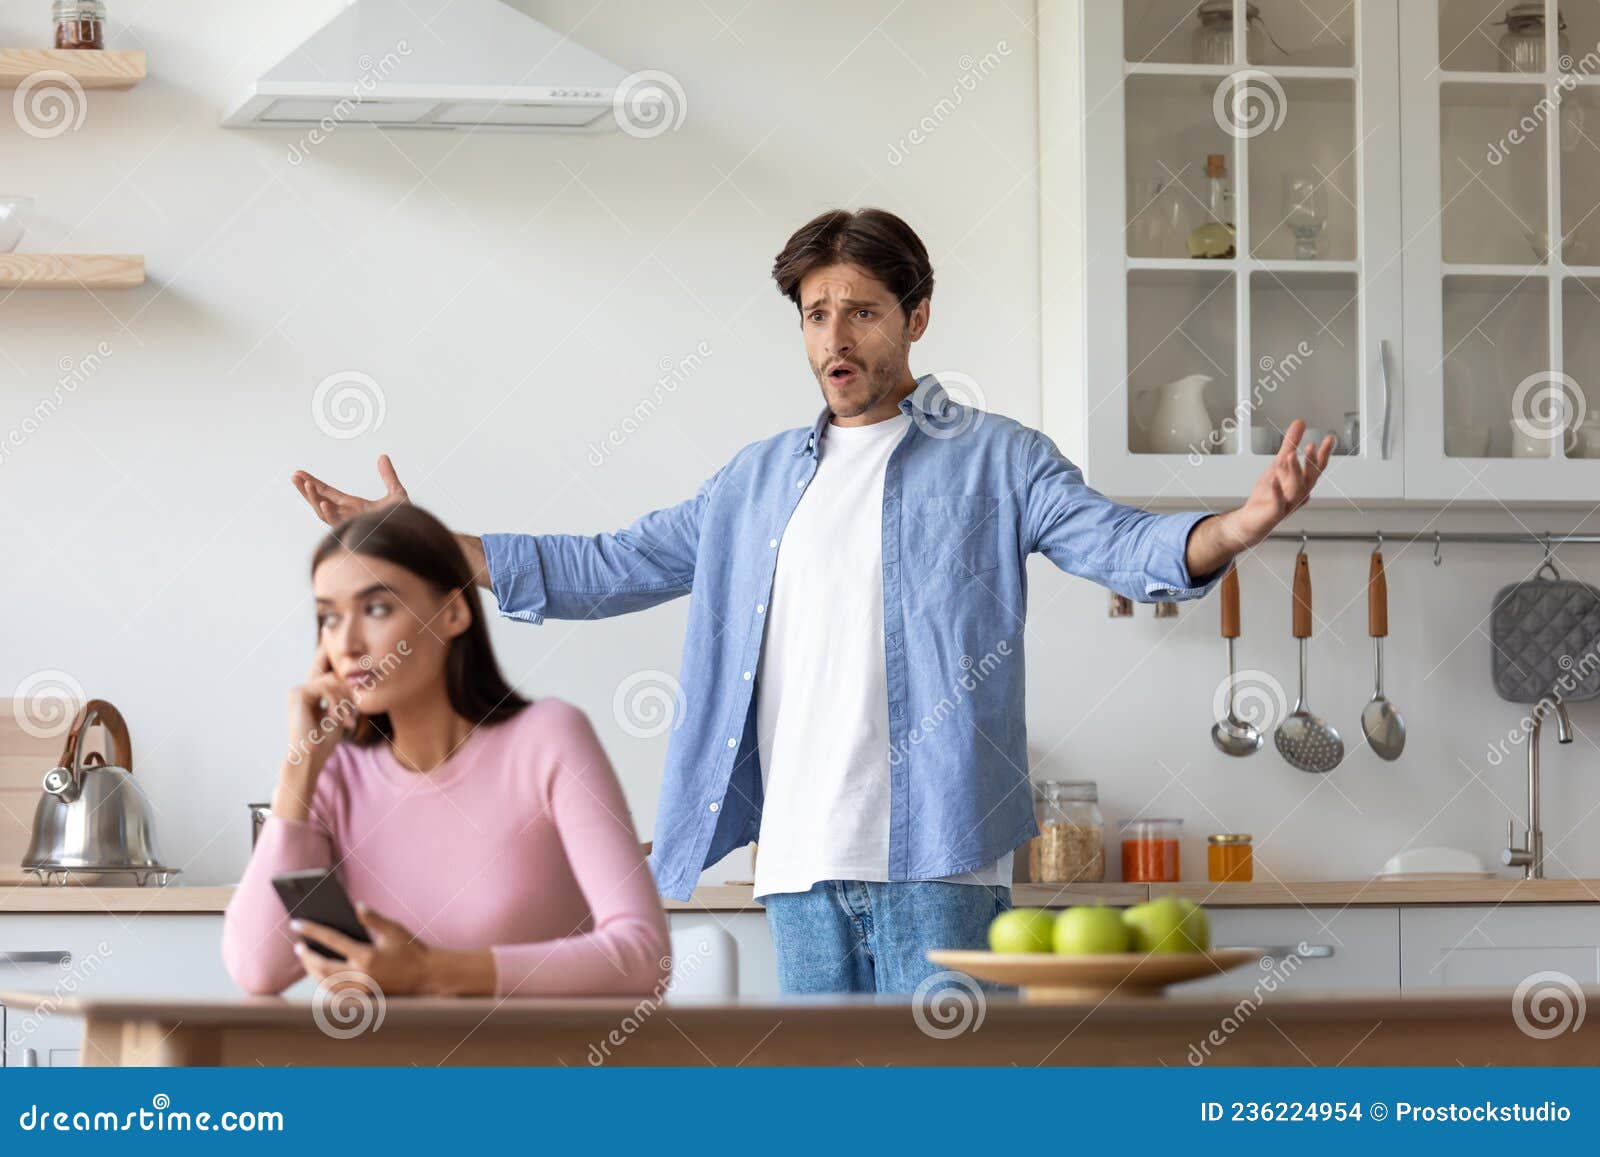 sad young european woman with smartphone ignores offended angry screaming gesticulating husband